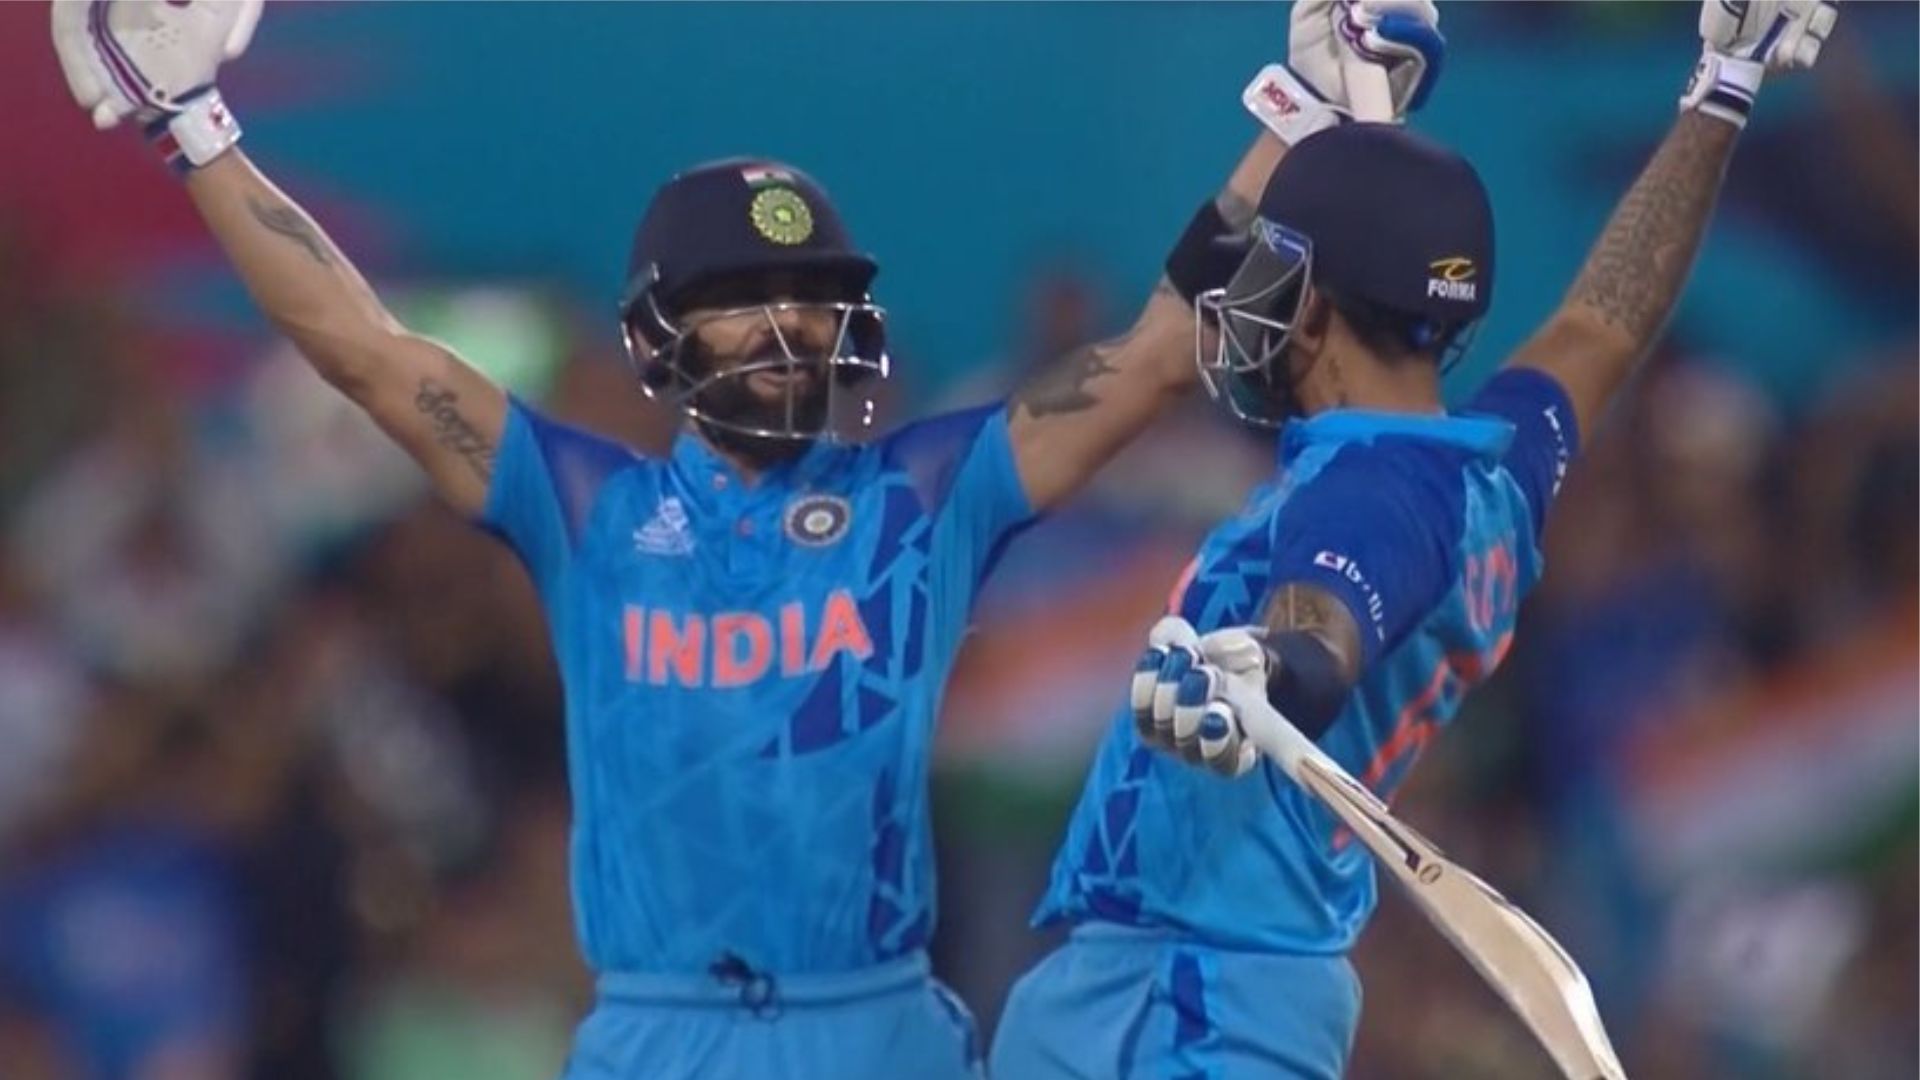 Kohli and SKY reacts after taking India to 179. 